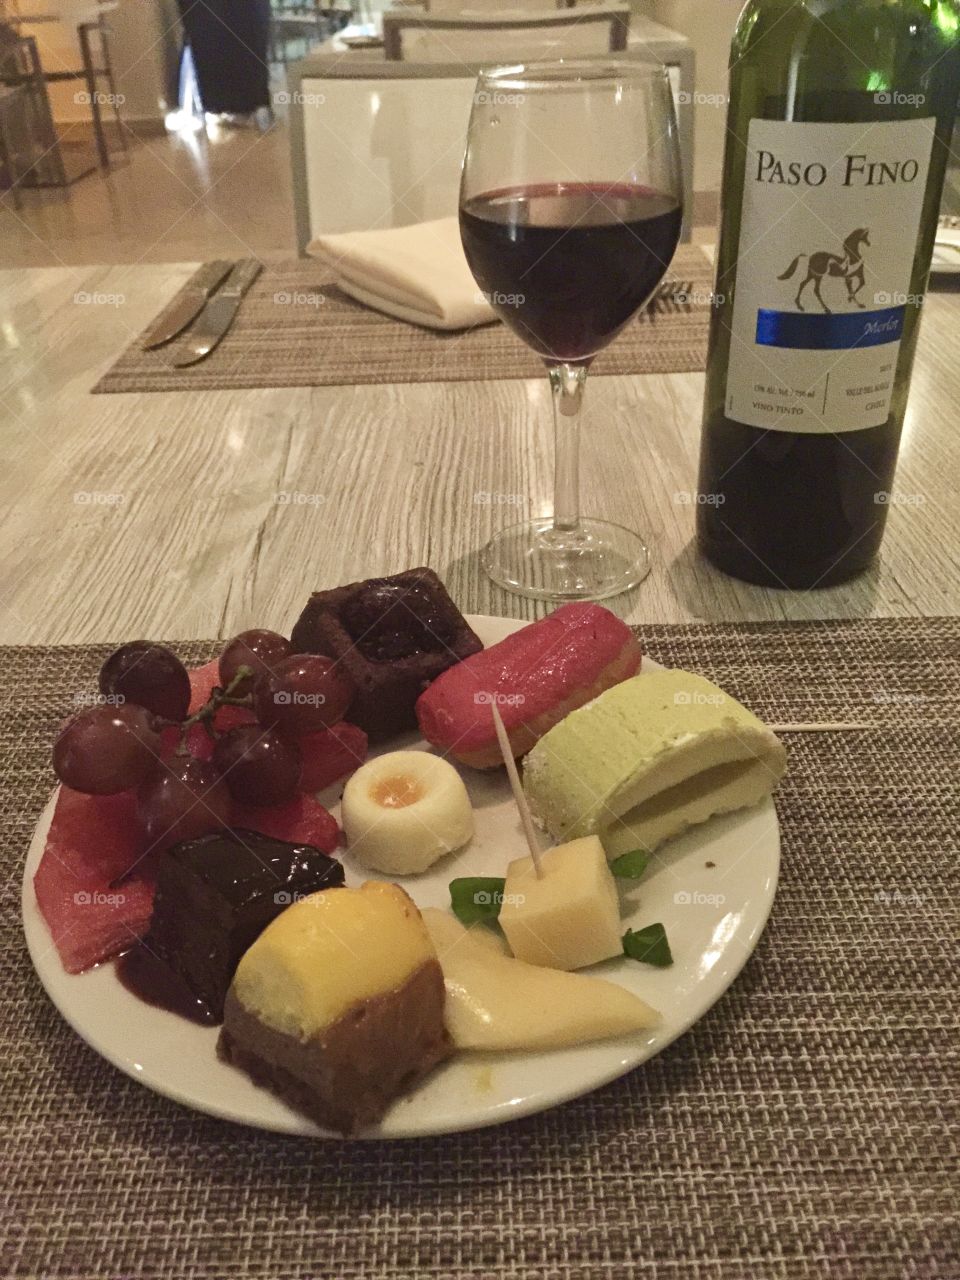 Fruit cheese sweets dessert plate , The perfect ending to a wonderful meal… Romantic wine red wine Merlot Cabernet, Resort living luxurious dining